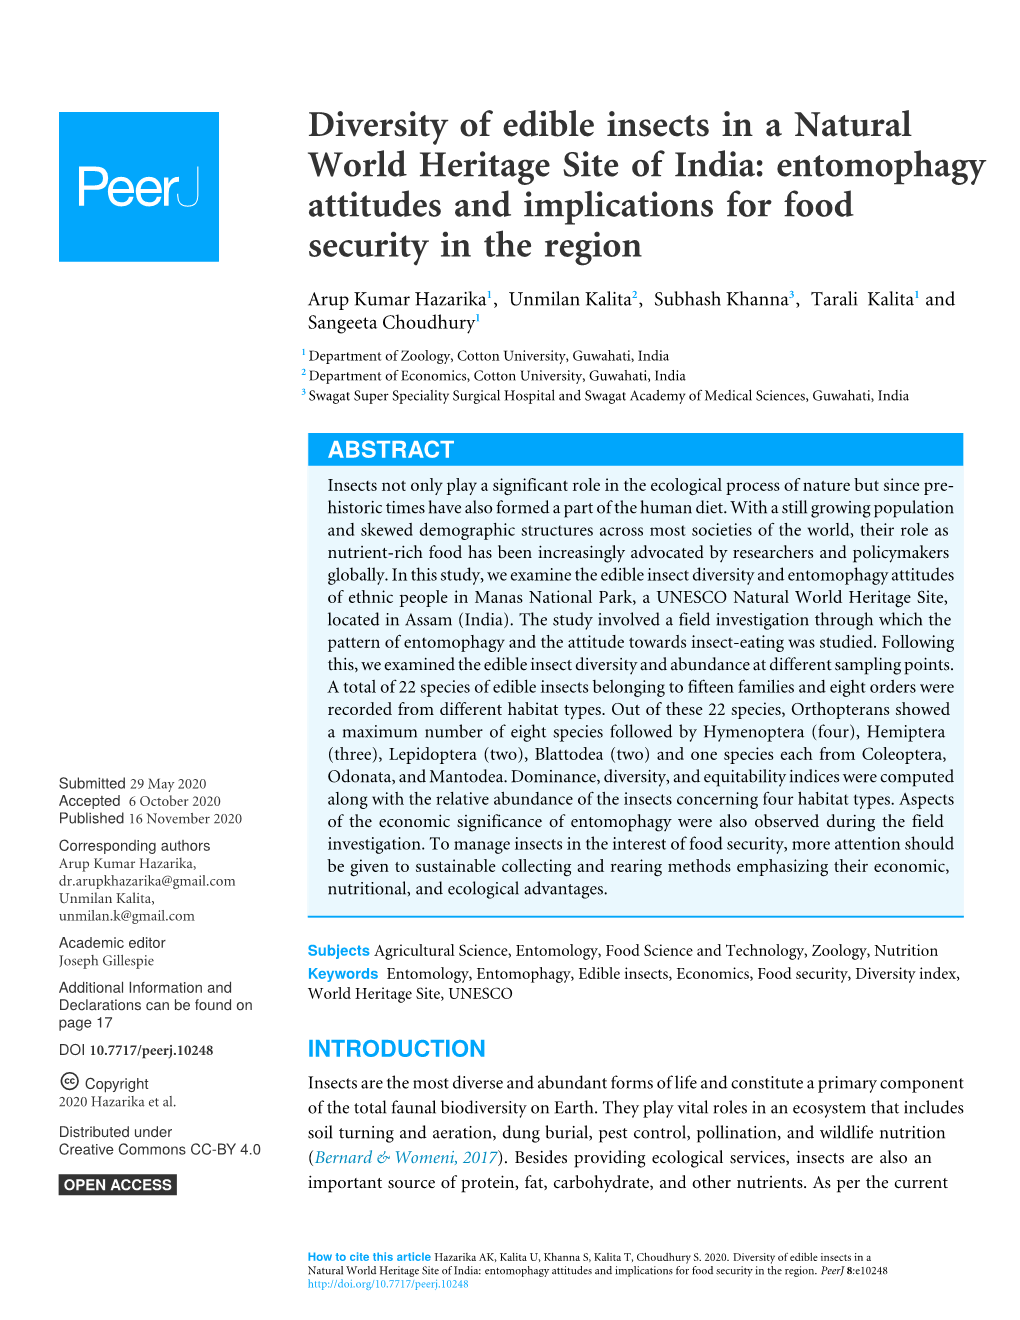 Diversity of Edible Insects in a Natural World Heritage Site of India: Entomophagy Attitudes and Implications for Food Security in the Region